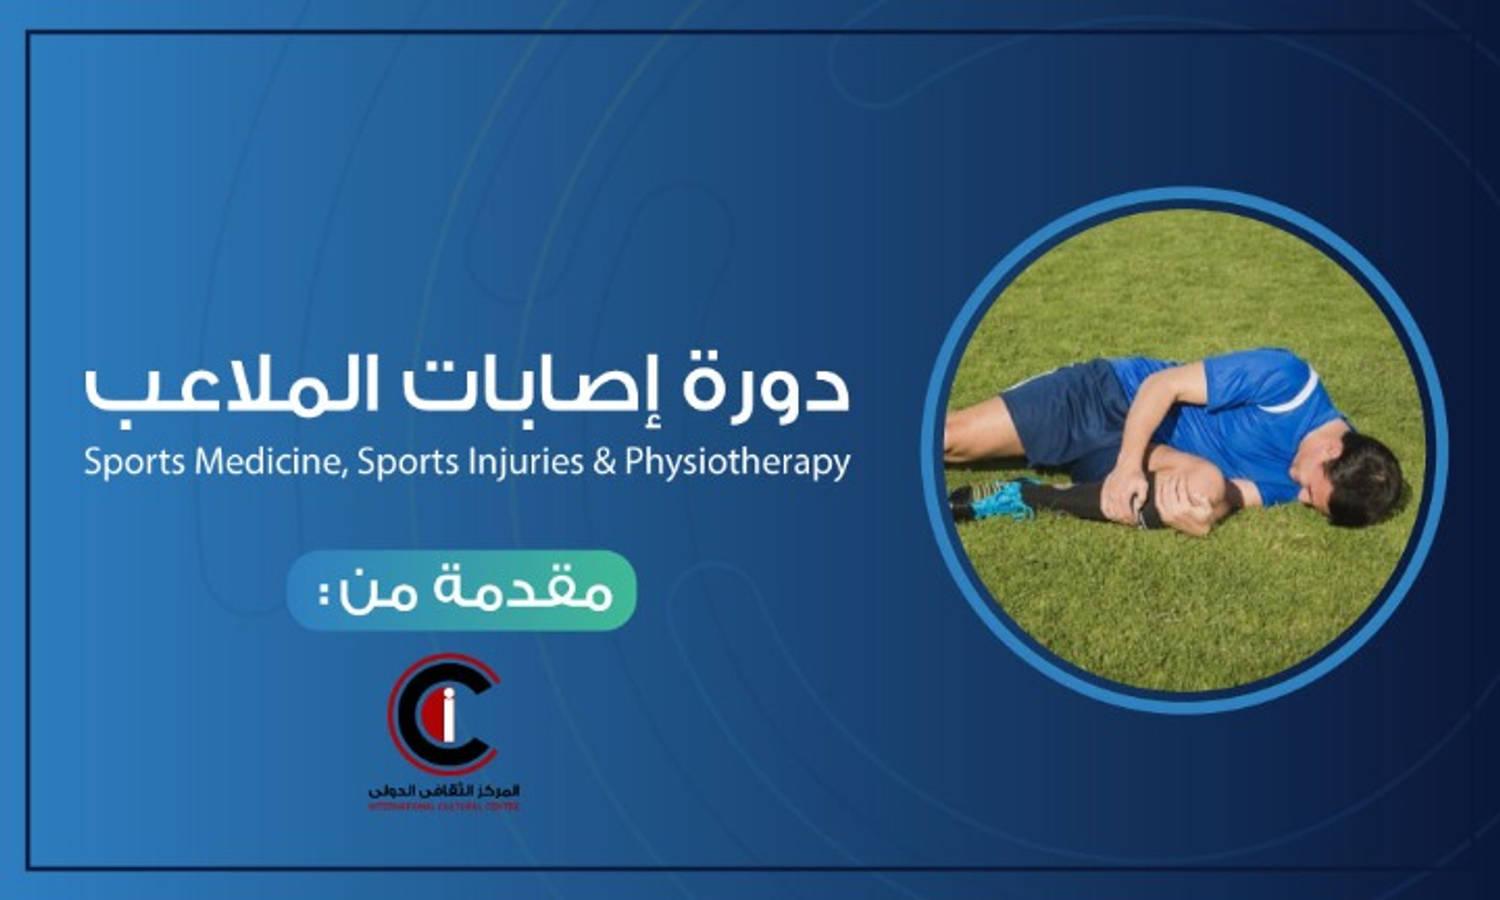 Sports Medicine, Sports Injuries & Physiotherapy Course 